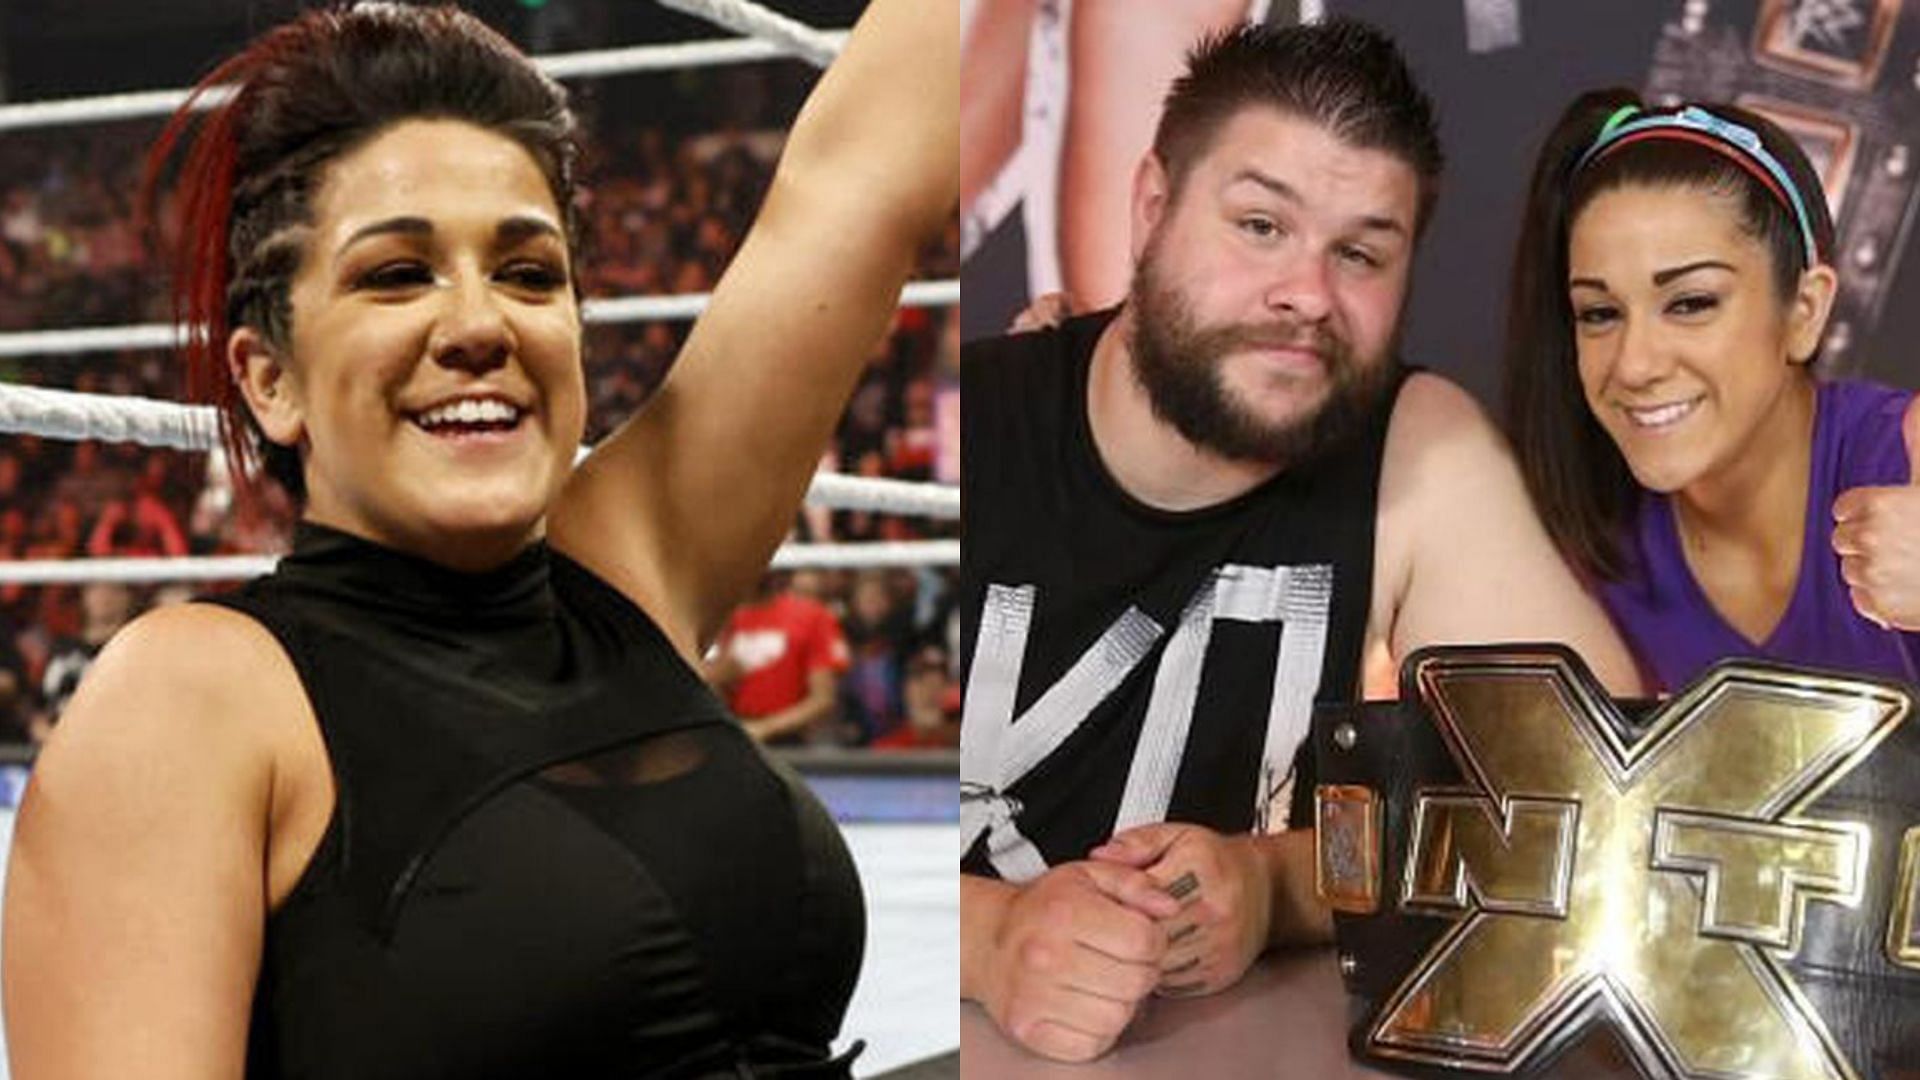 Bayley took note of Kevin Owens recent actions from SmackDown